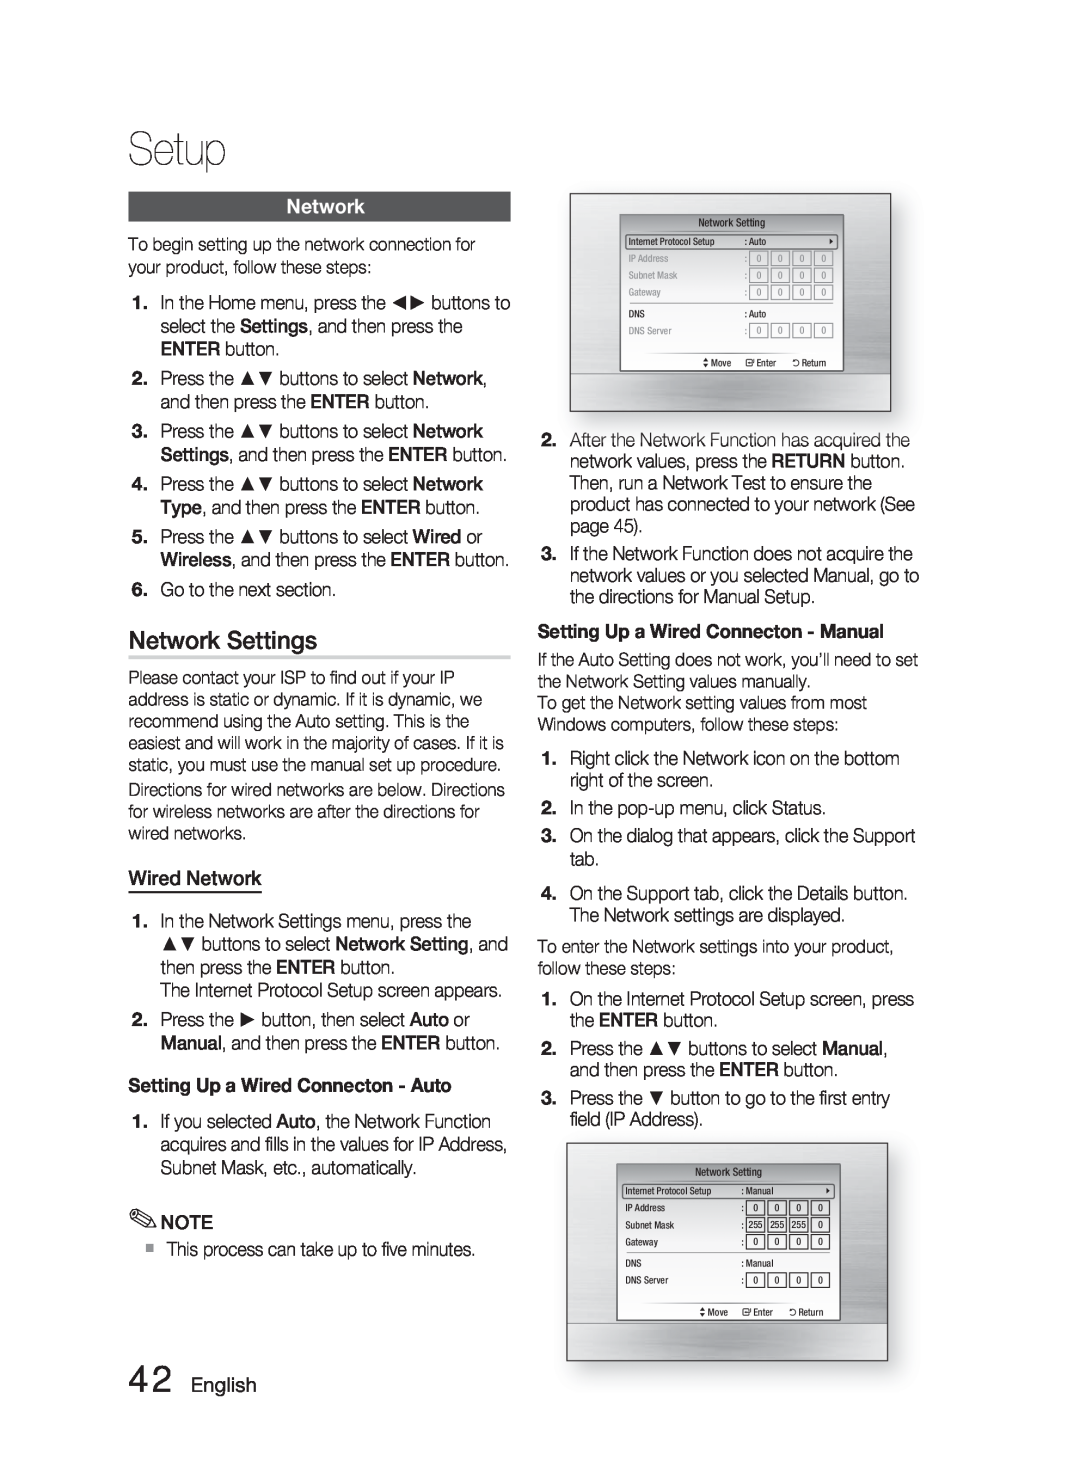 Samsung AH68-02279Y user manual Network Settings, Wired Network, English, Setup 